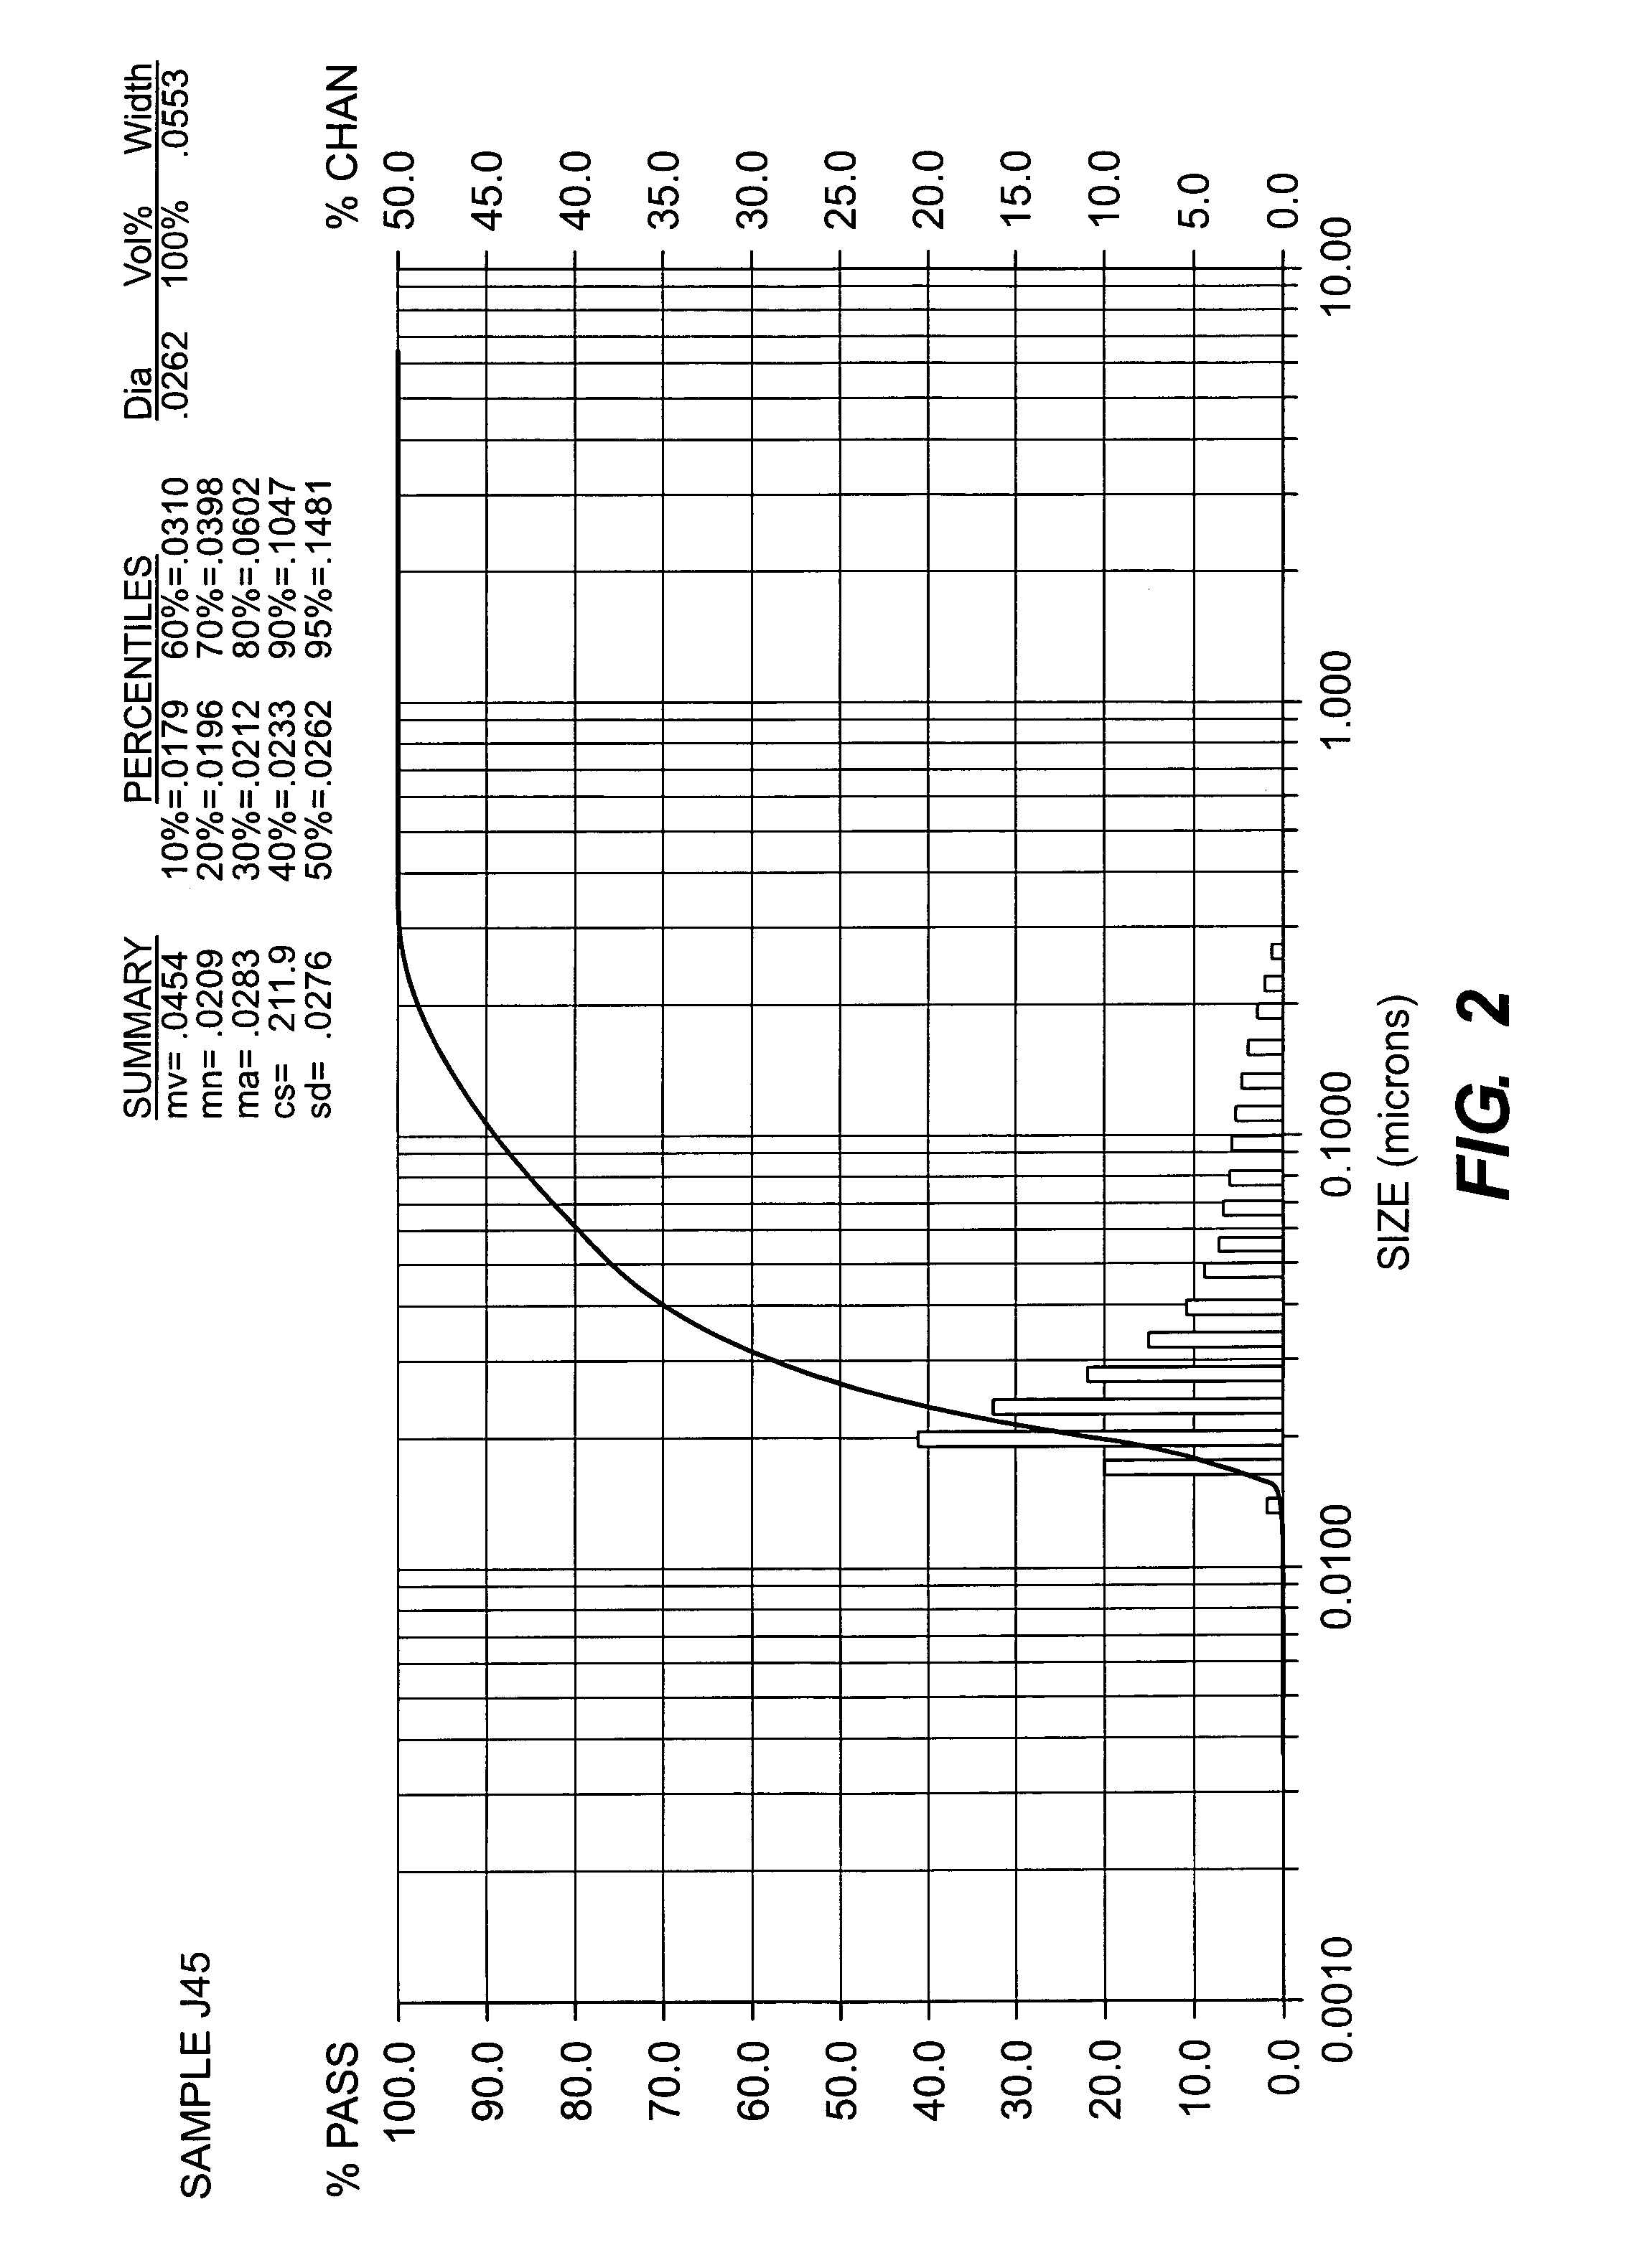 Photosensitive organic semiconductor compositions